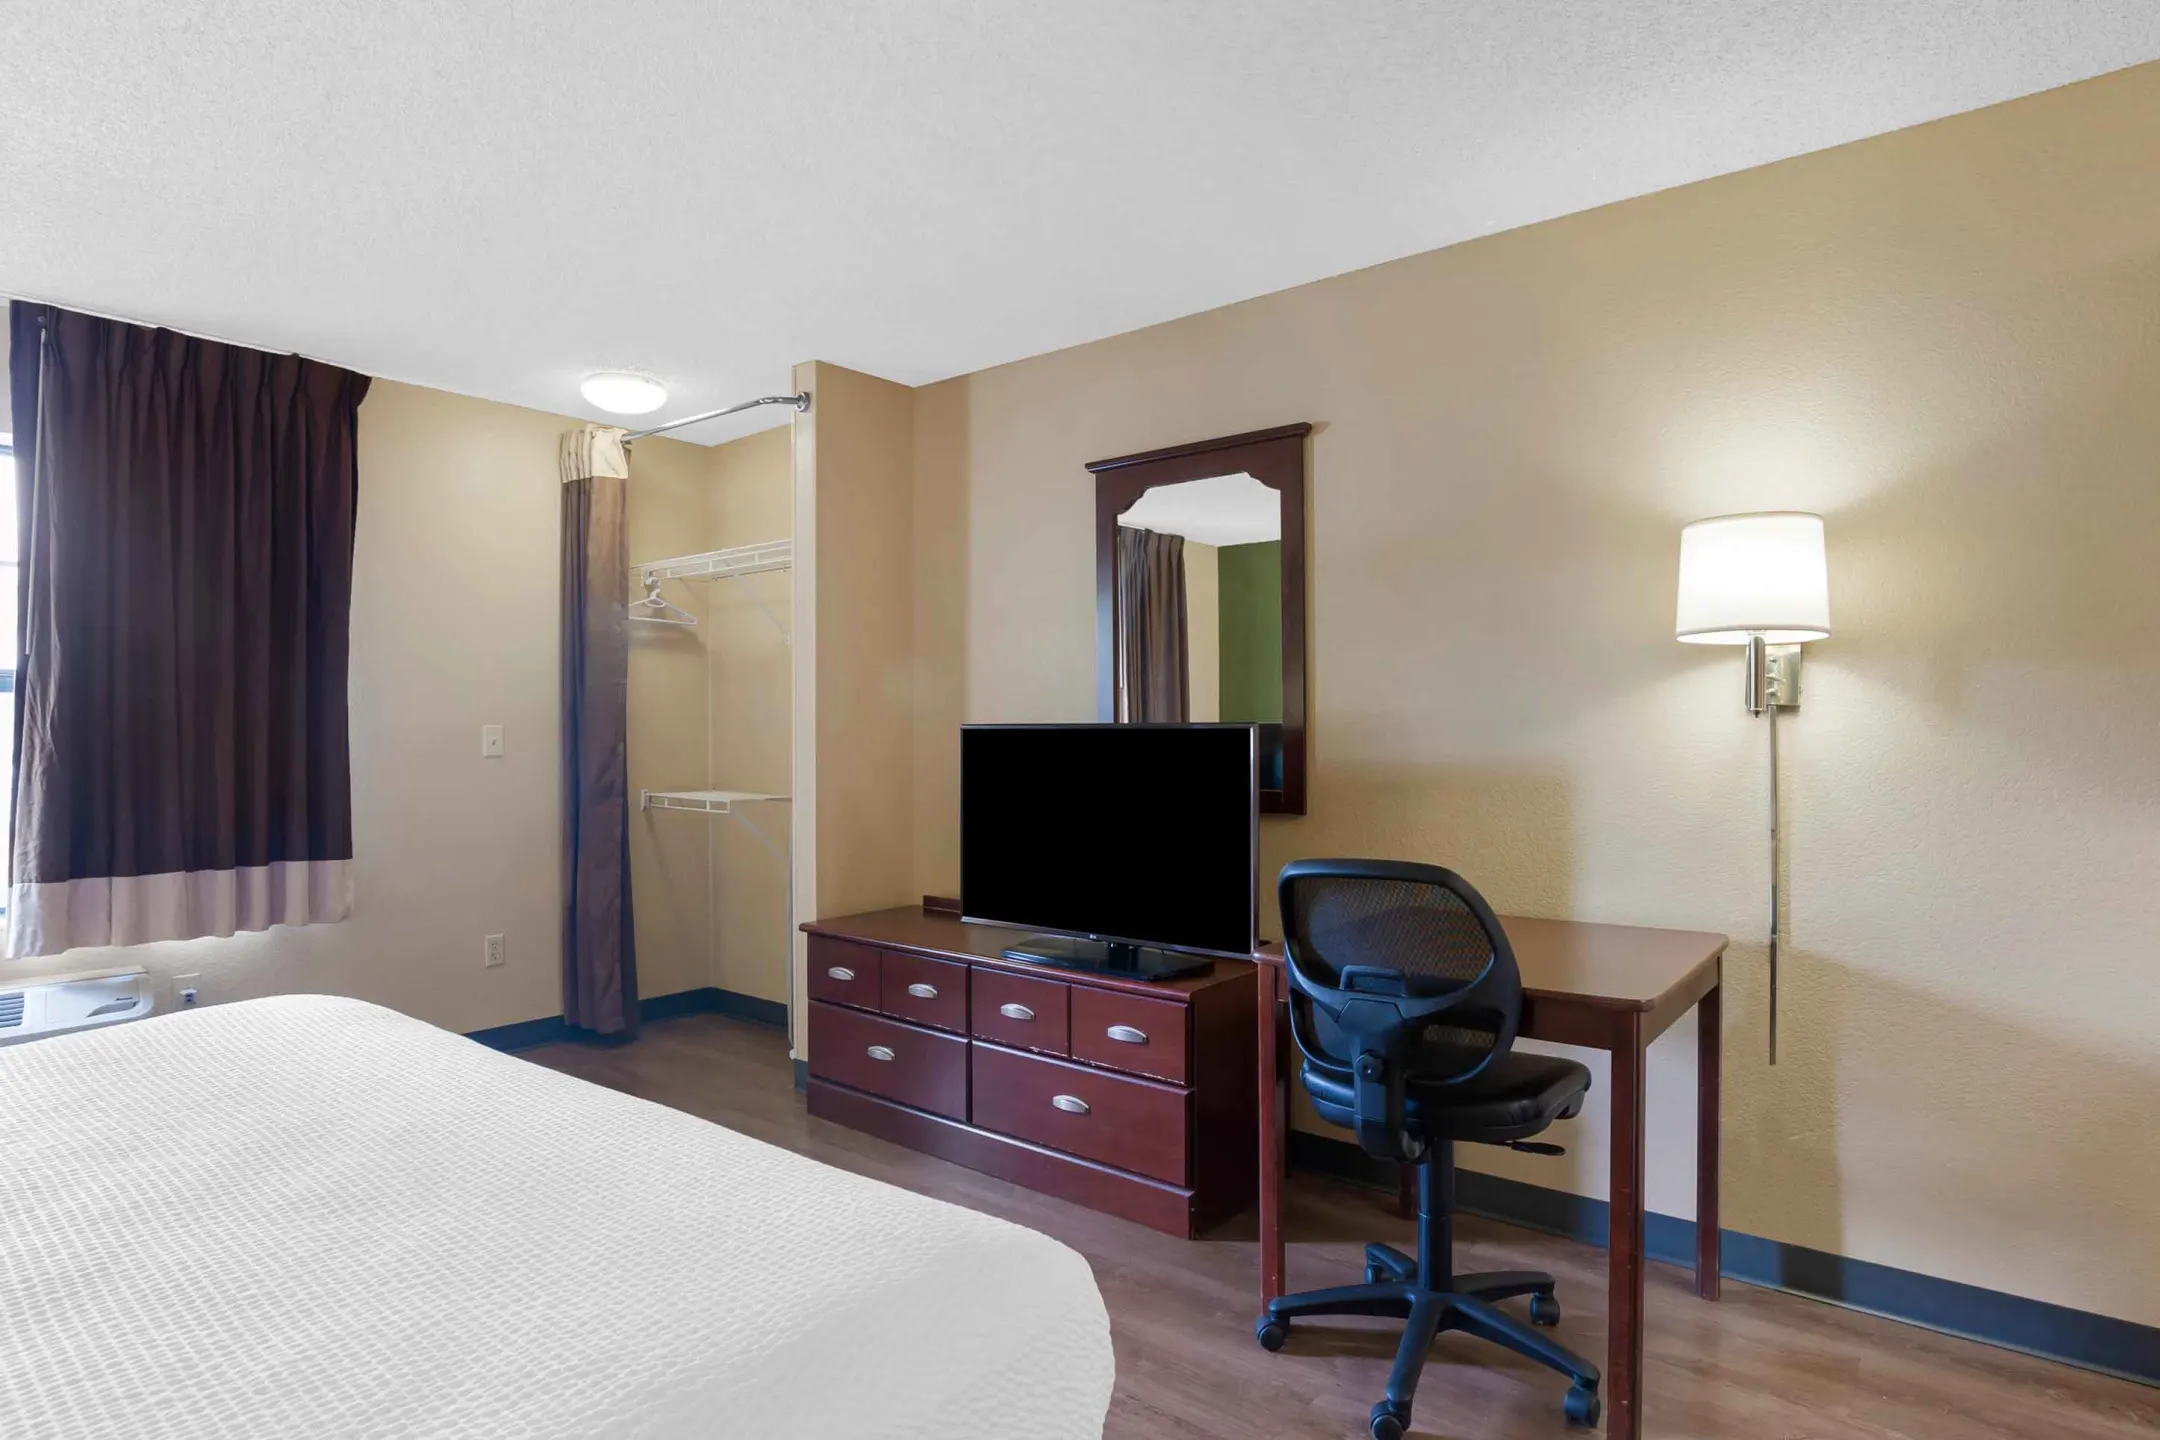 Bedroom - Furnished Studio - Clearwater - Carillon Park - Clearwater, FL